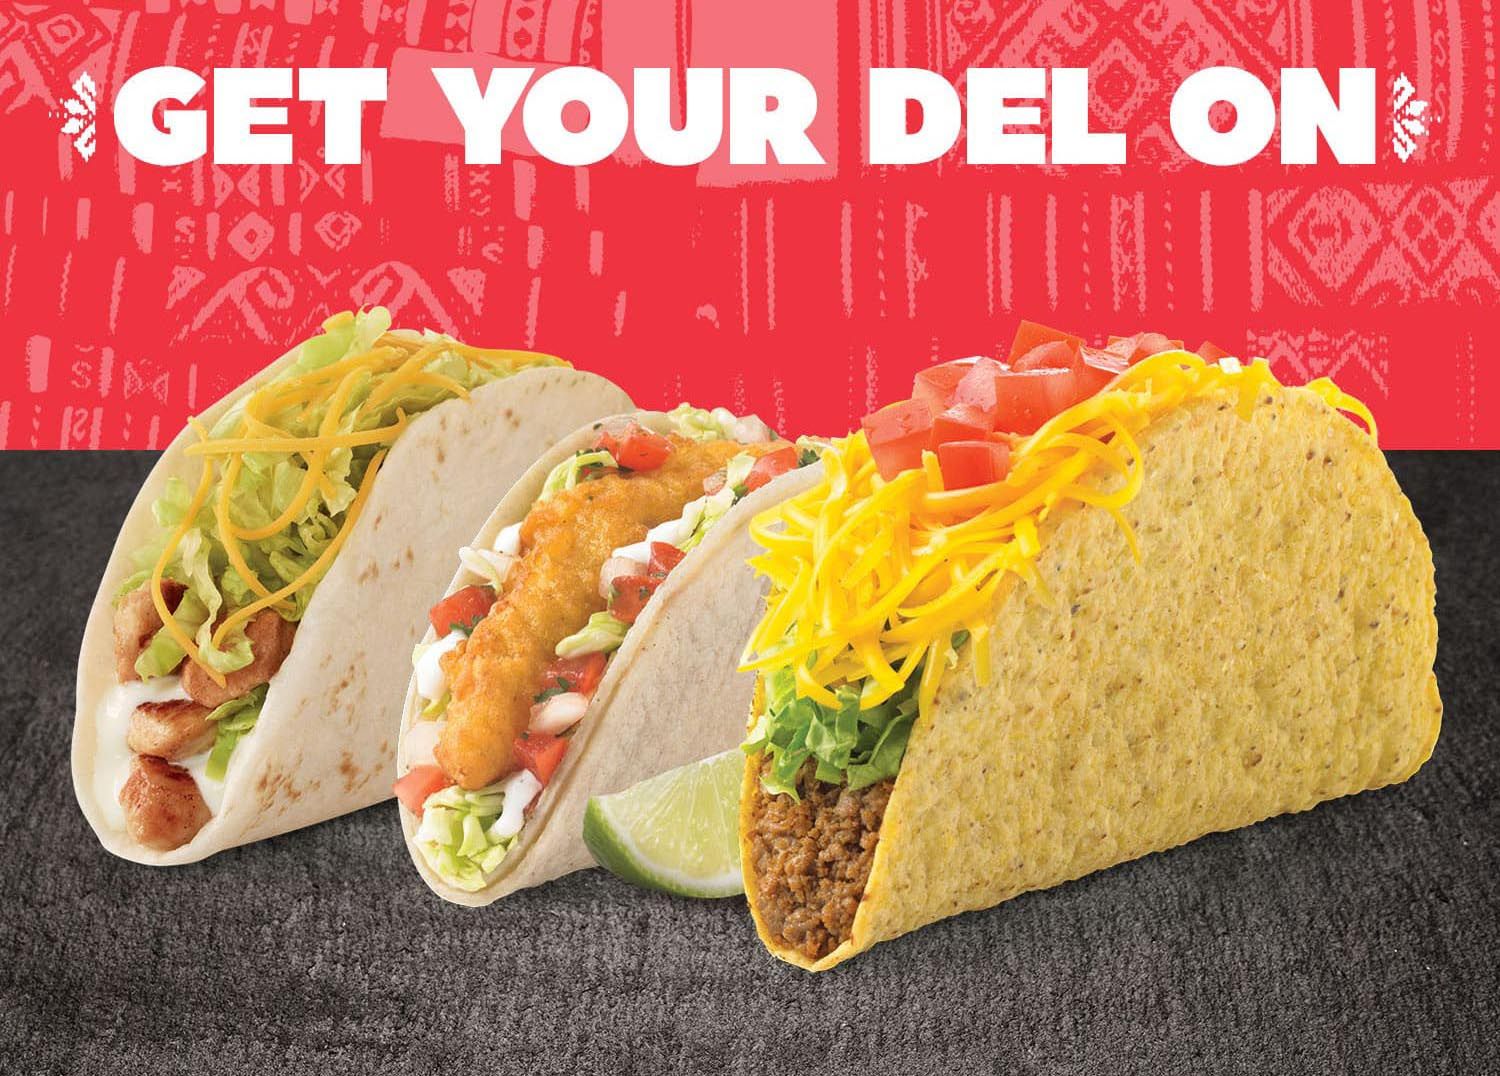 Del Yeah! Rewards Members Get Free Delivery on $15+ In-app or Online Orders Every Friday Through Sunday in November at Del Taco 